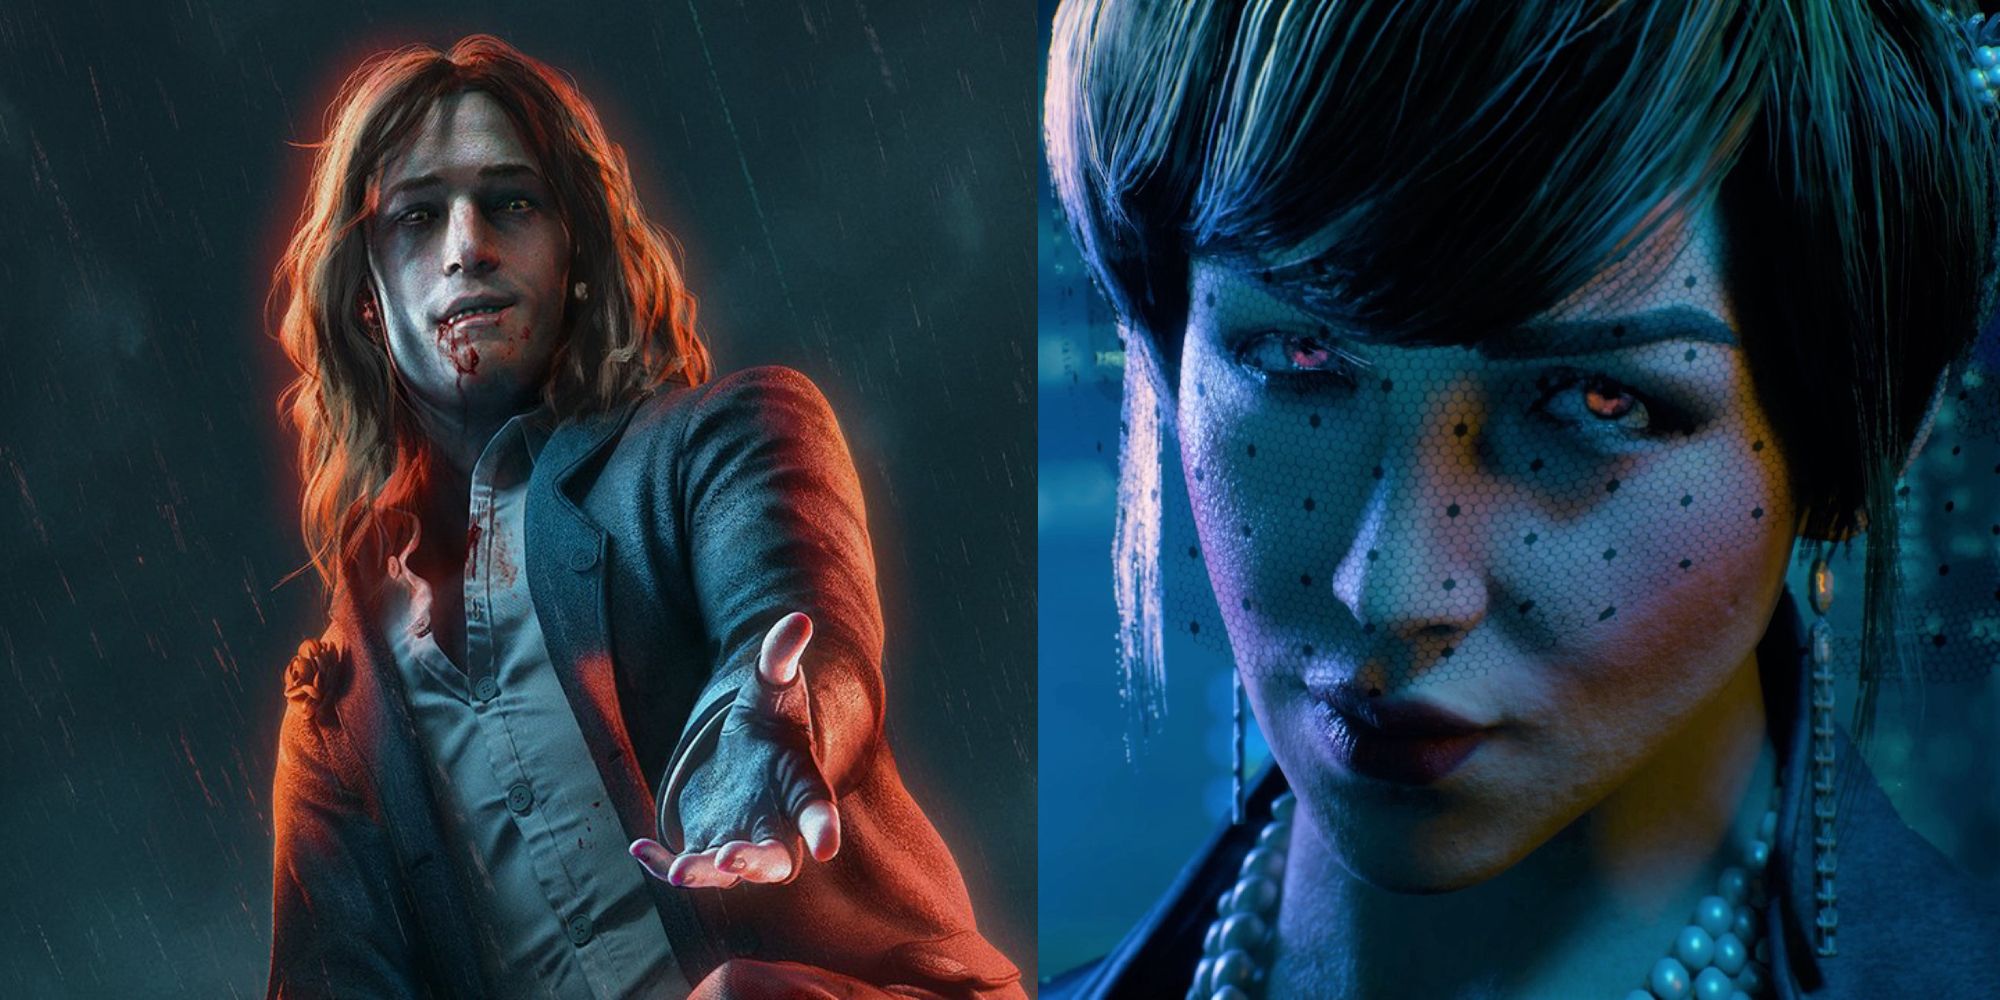 Split image featuring two characters from Bloodlines 2